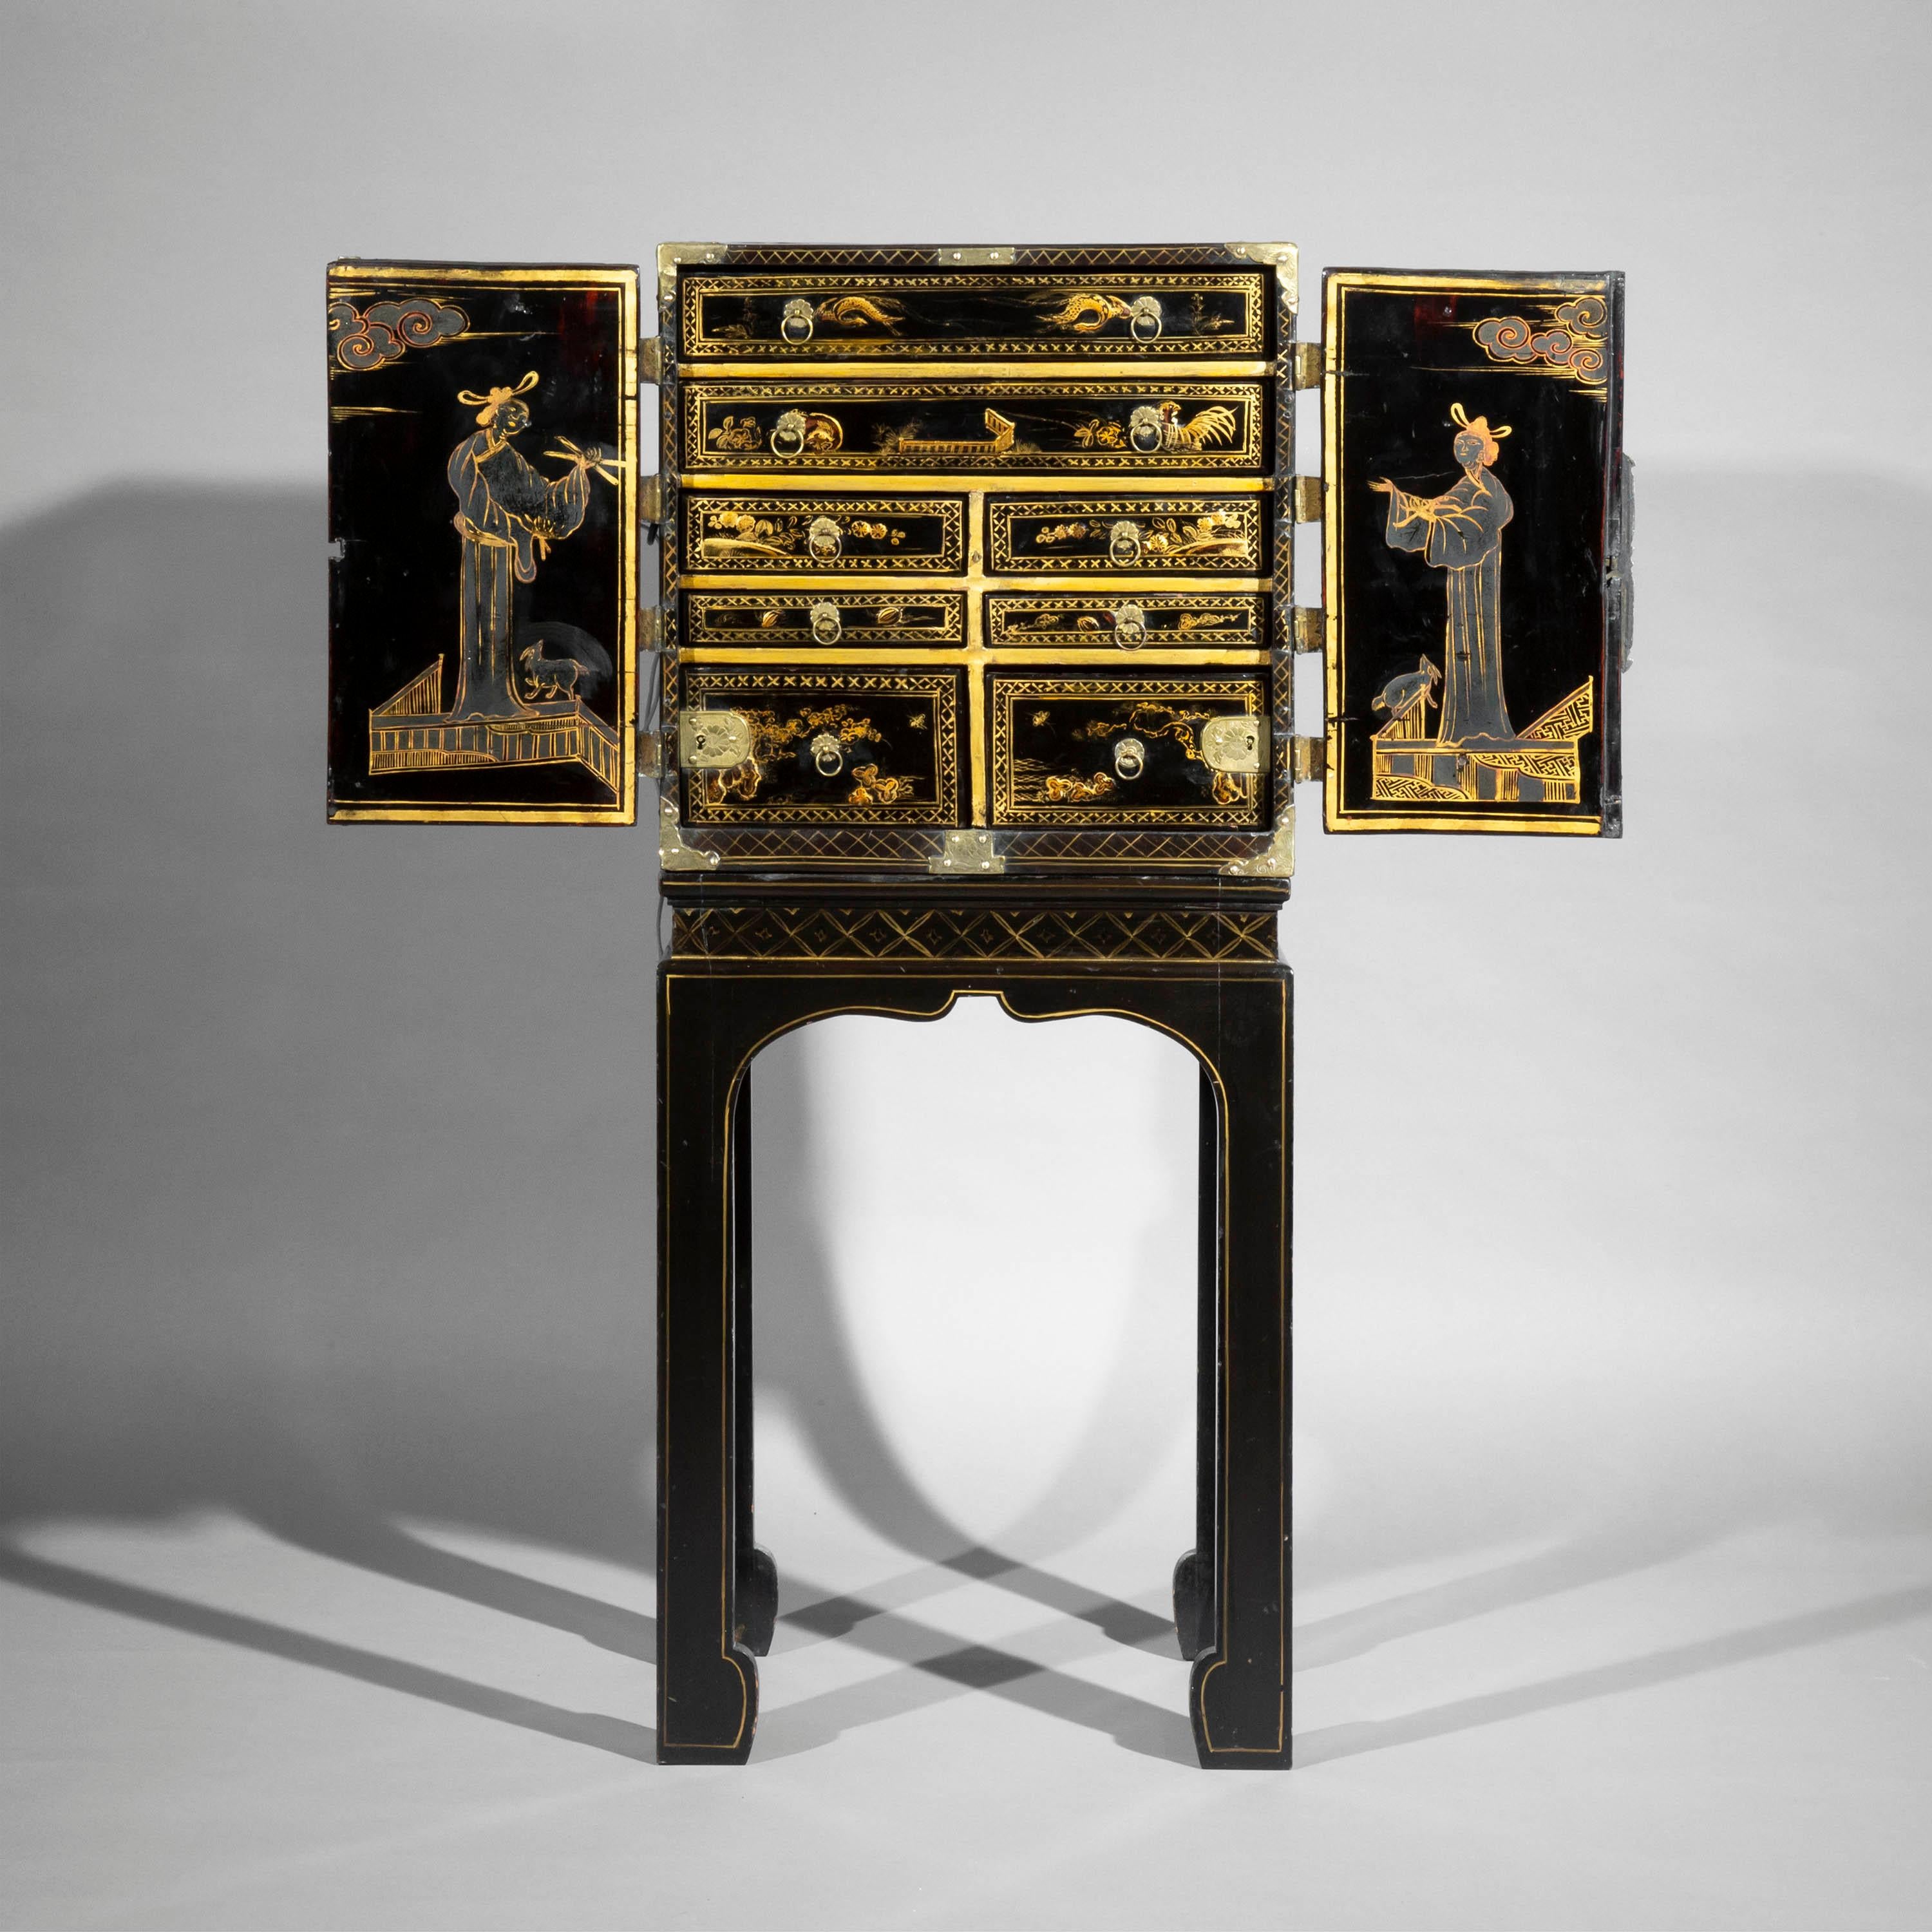 Qing Antique Chinoiserie Black Lacquer Cabinet on Stand, 19th Century